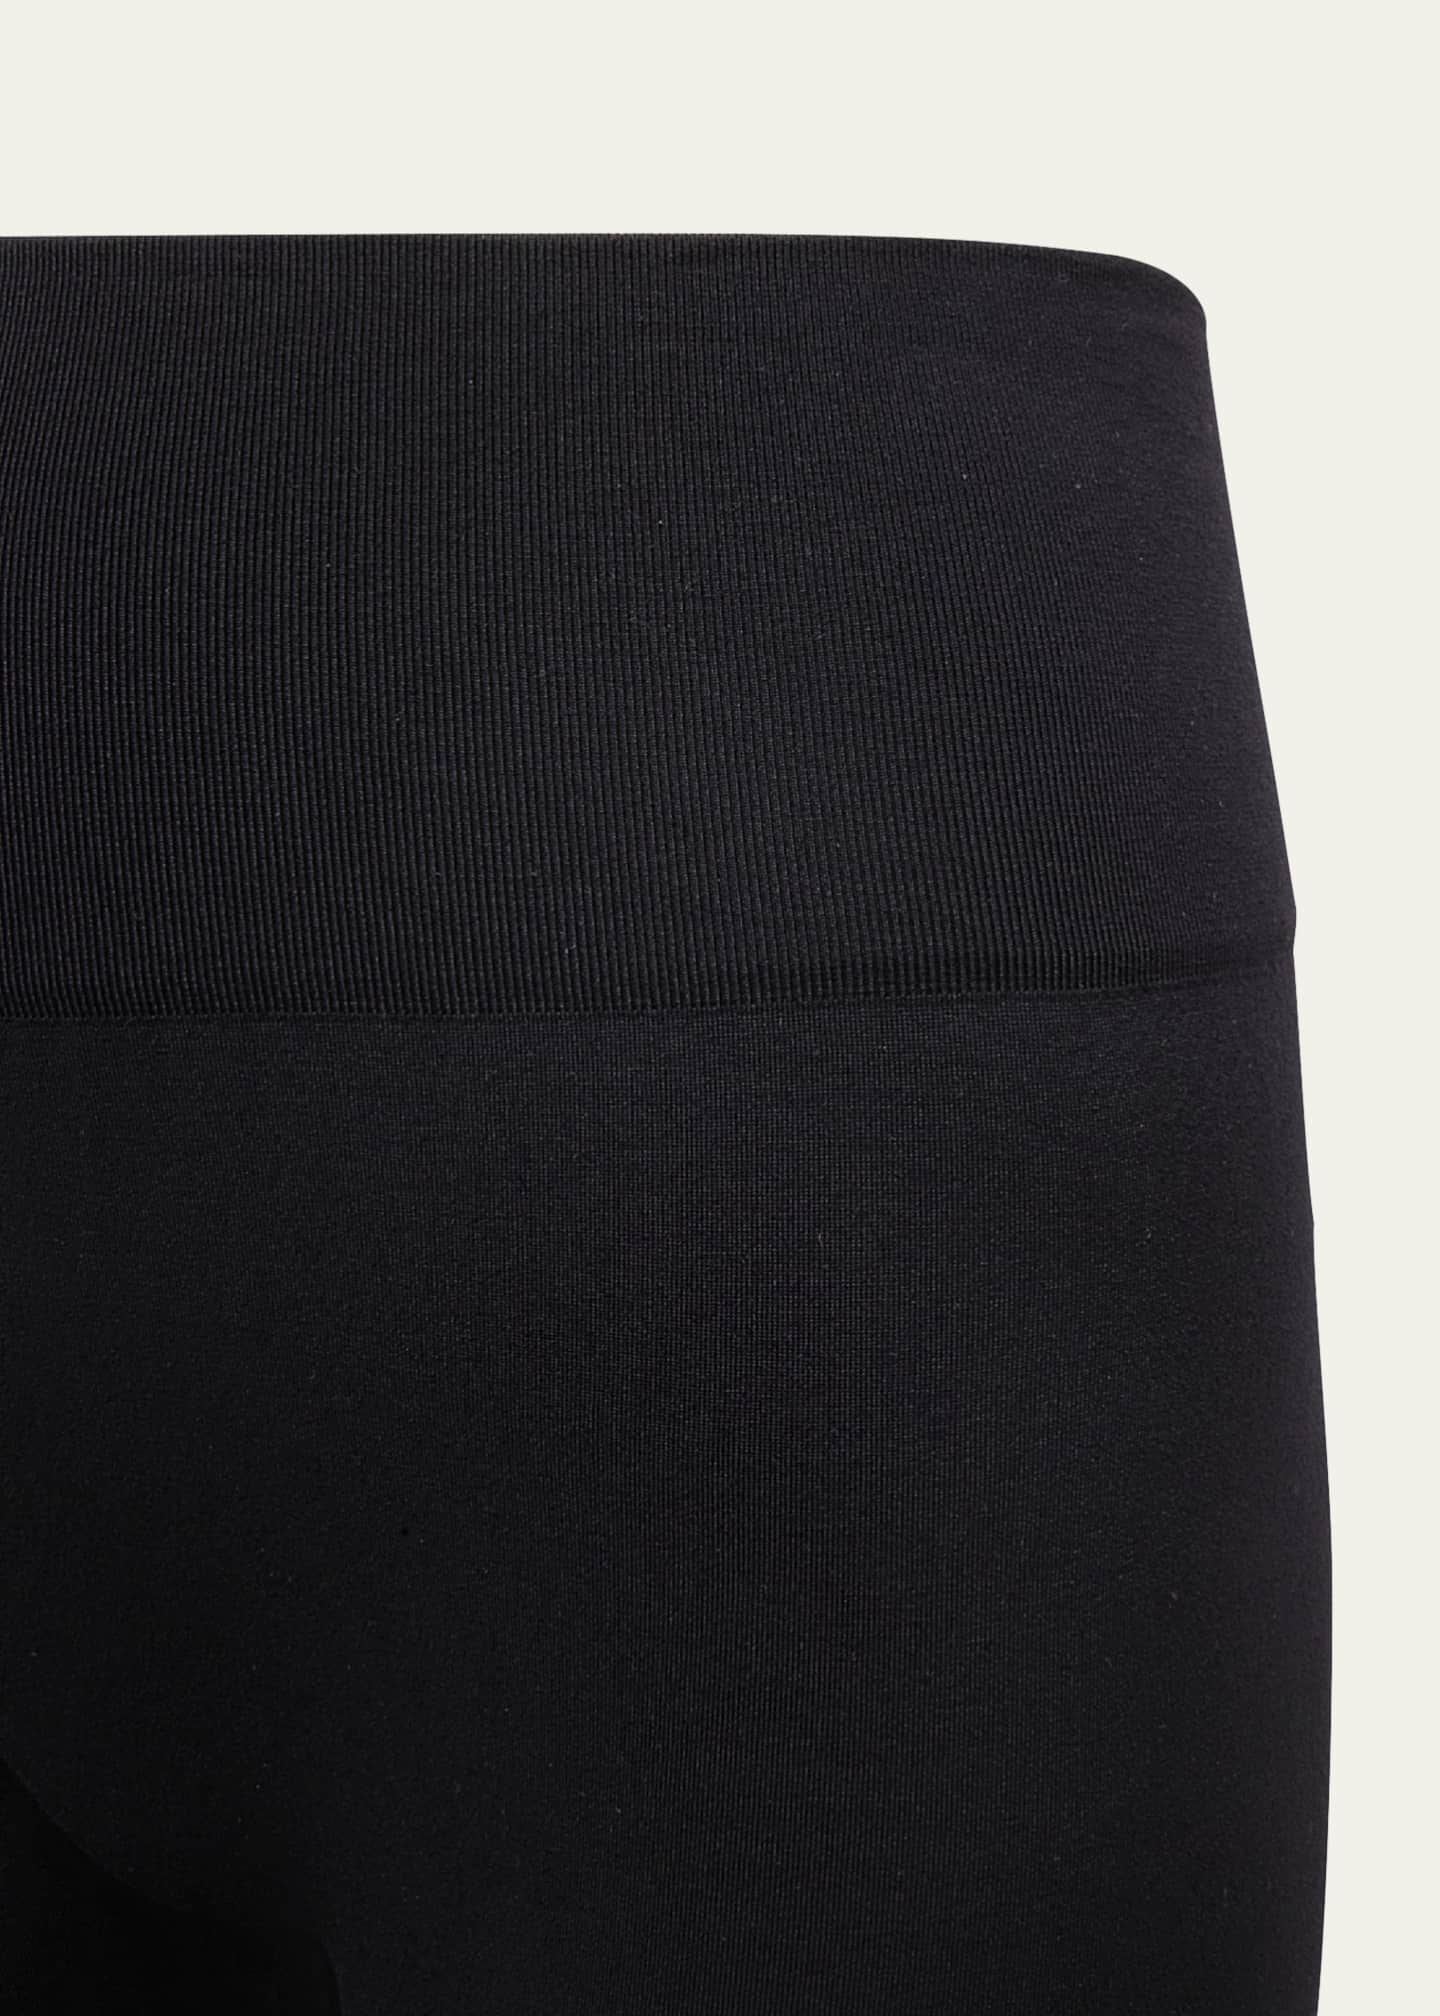 Perfect Fit Wolford Leggings [14554]